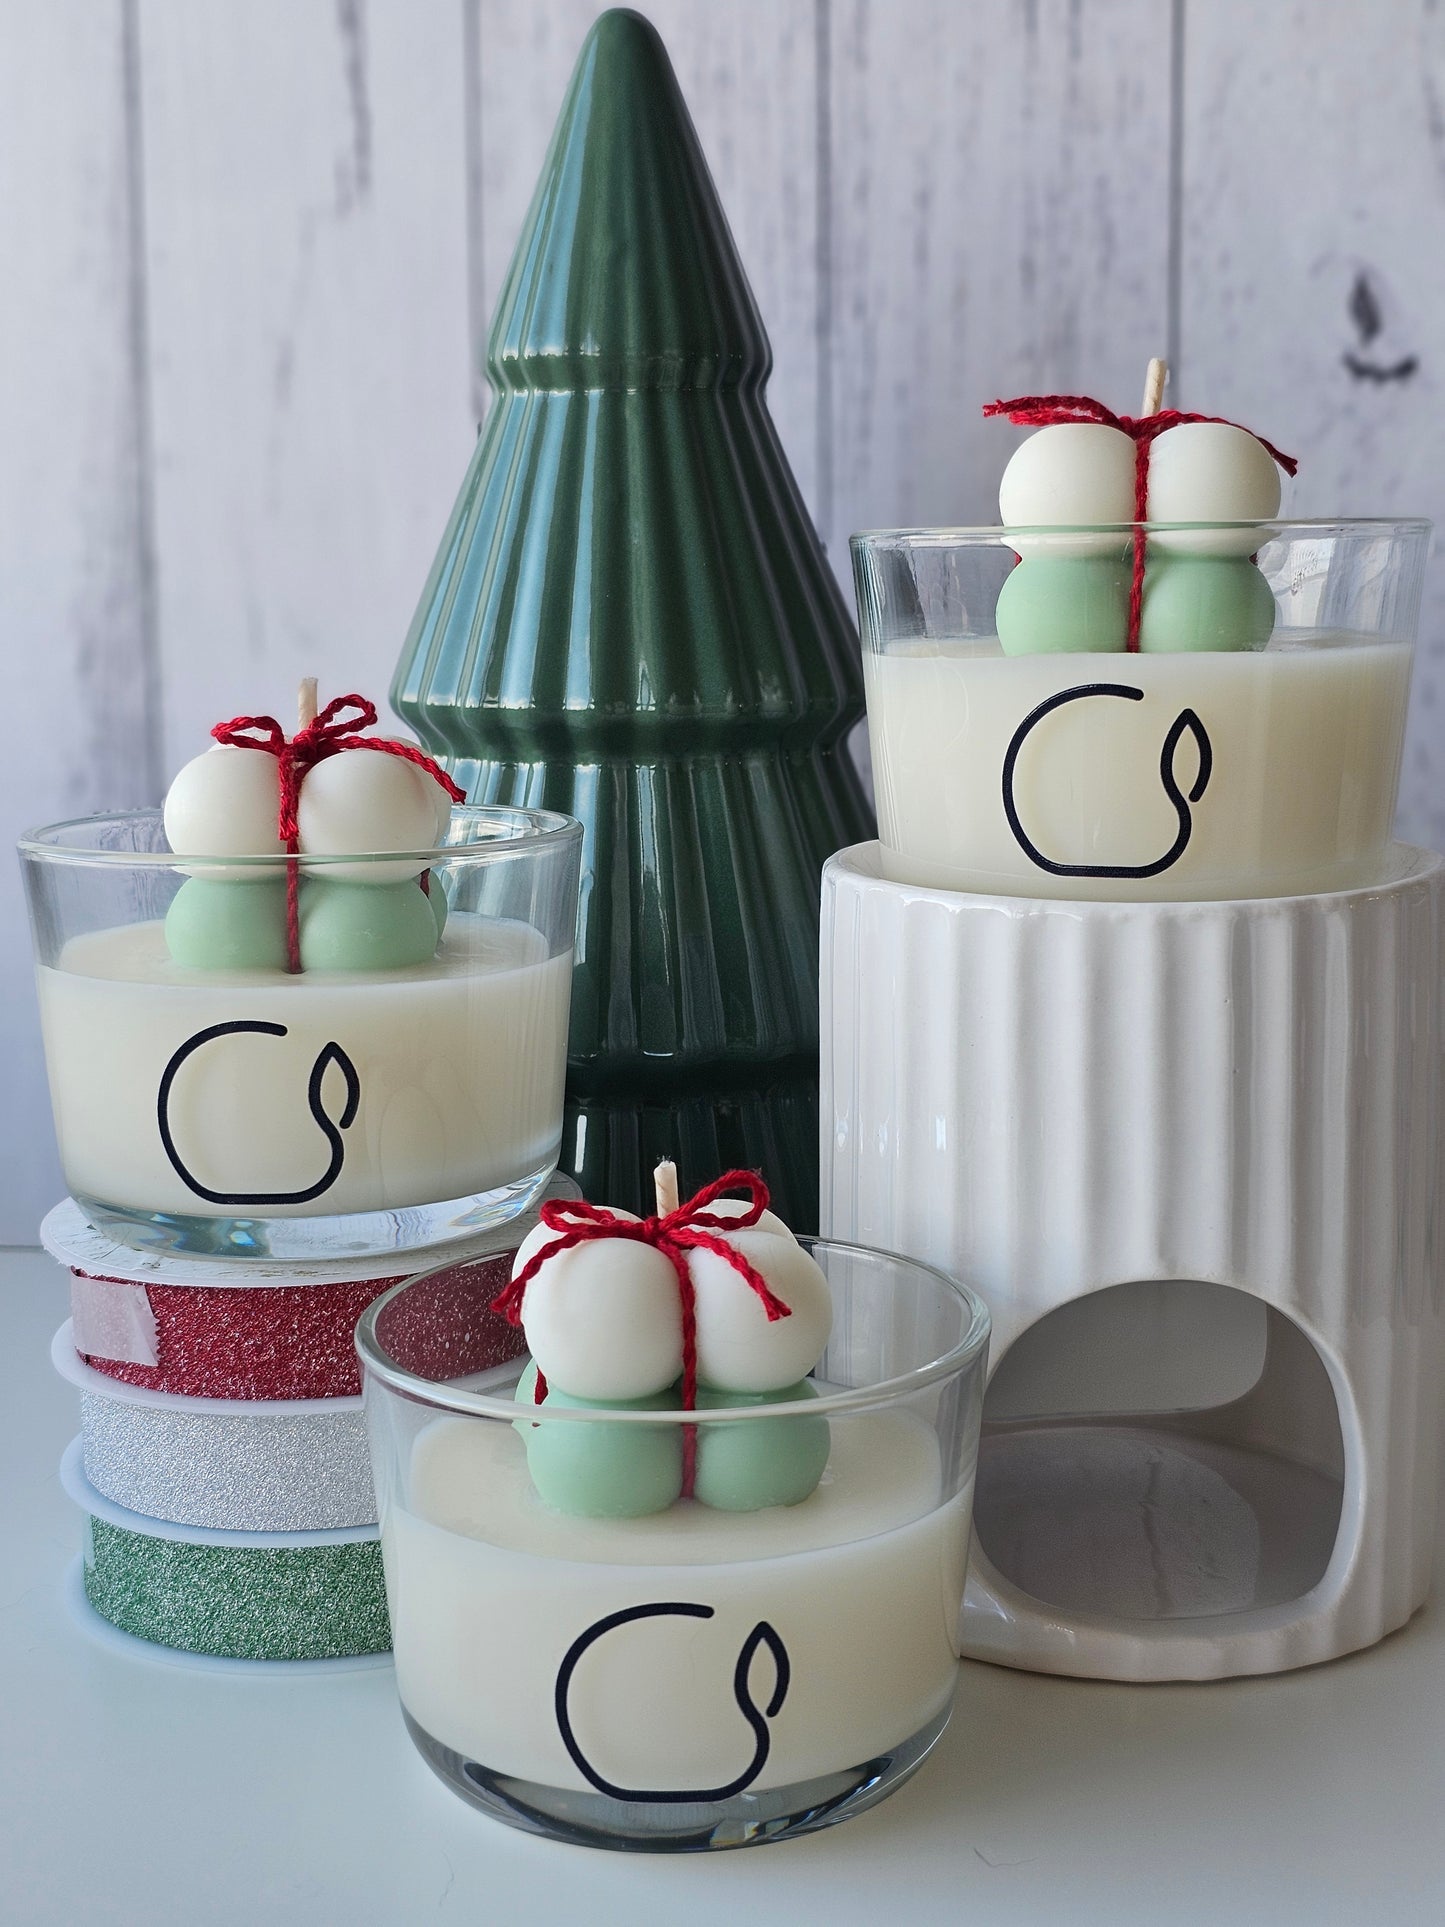 Gift Bubble Candle - 25Hours